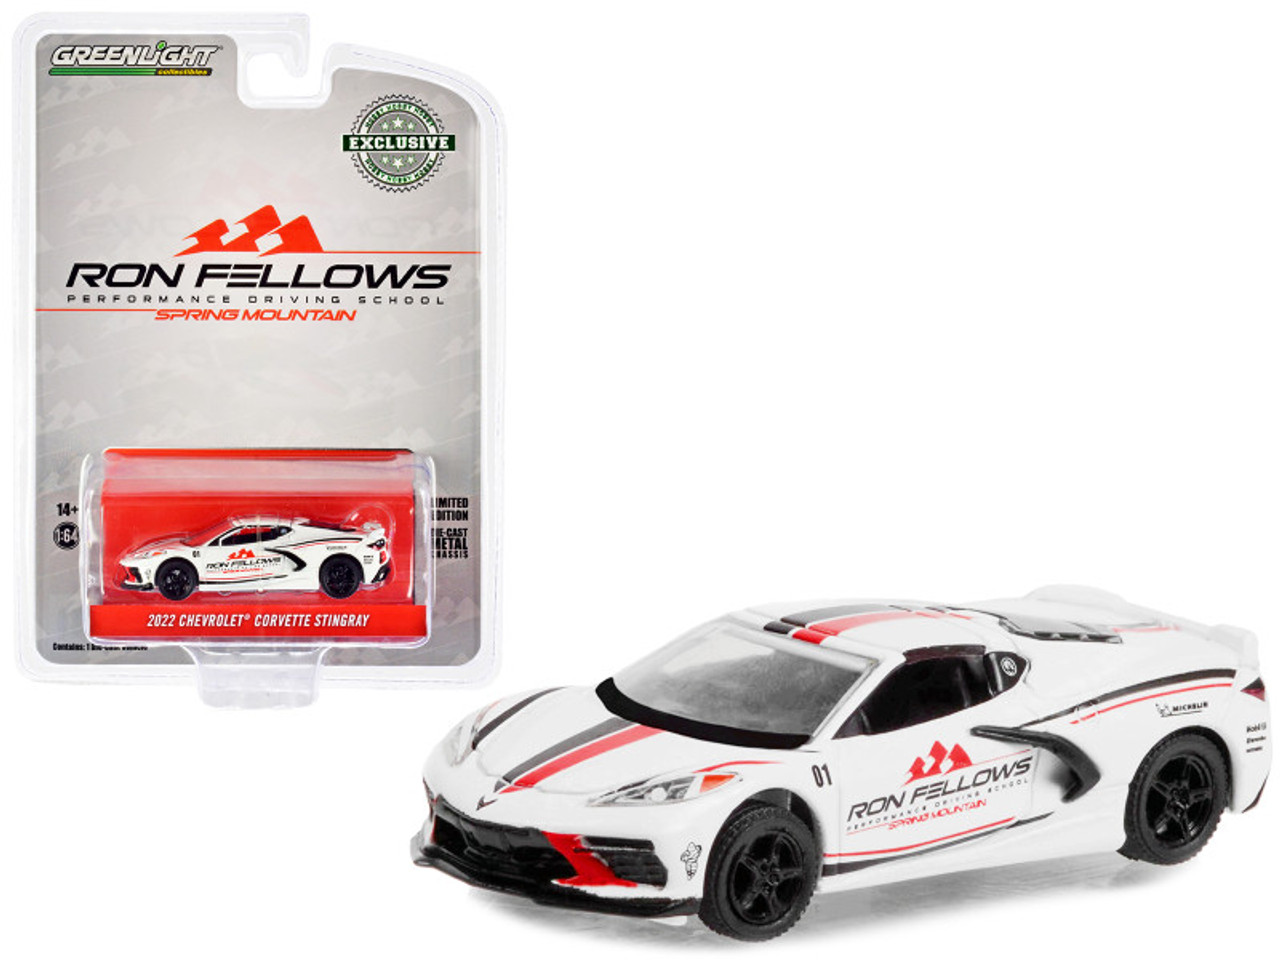 2022 Chevrolet Corvette C8 Stingray White with Stripes "Ron Fellows Performance Driving School: Spring Mountain" "Hobby Exclusive" Series 1/64 Diecast Model Car by Greenlight